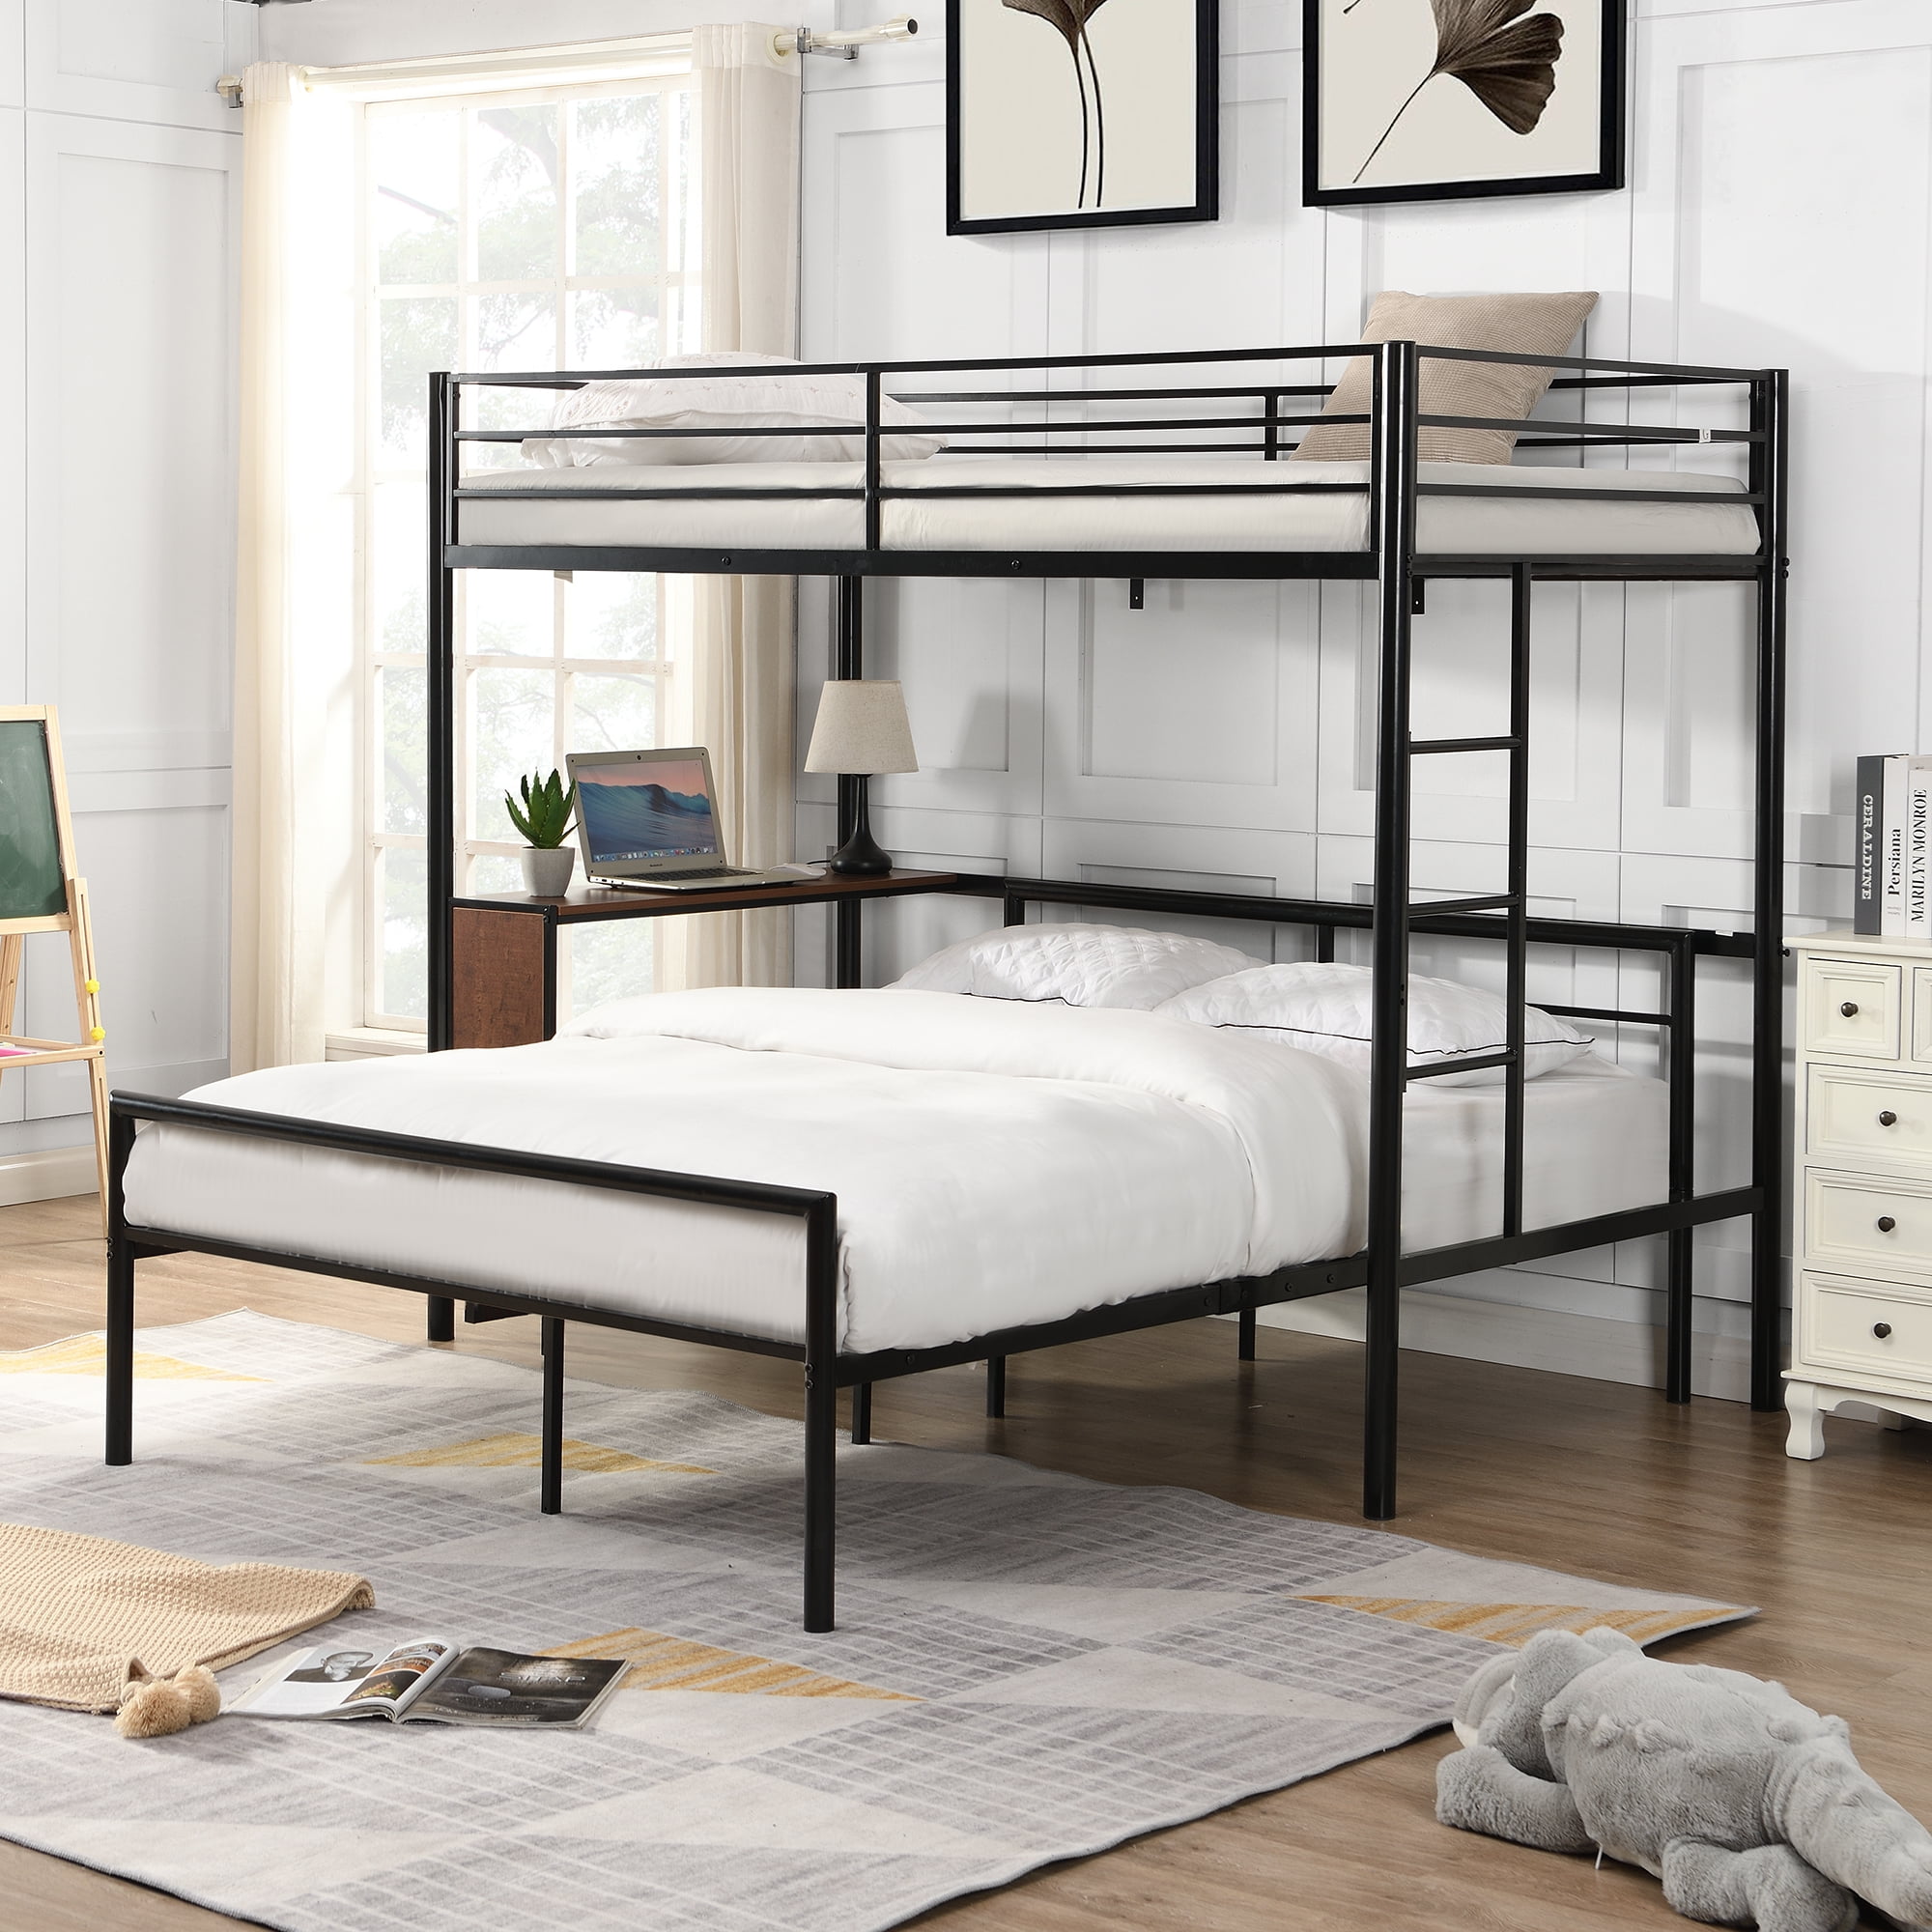 Ikayaa Twin Over Full Metal Bunk Bed, Bunk Beds With Built In Desk And Drawers